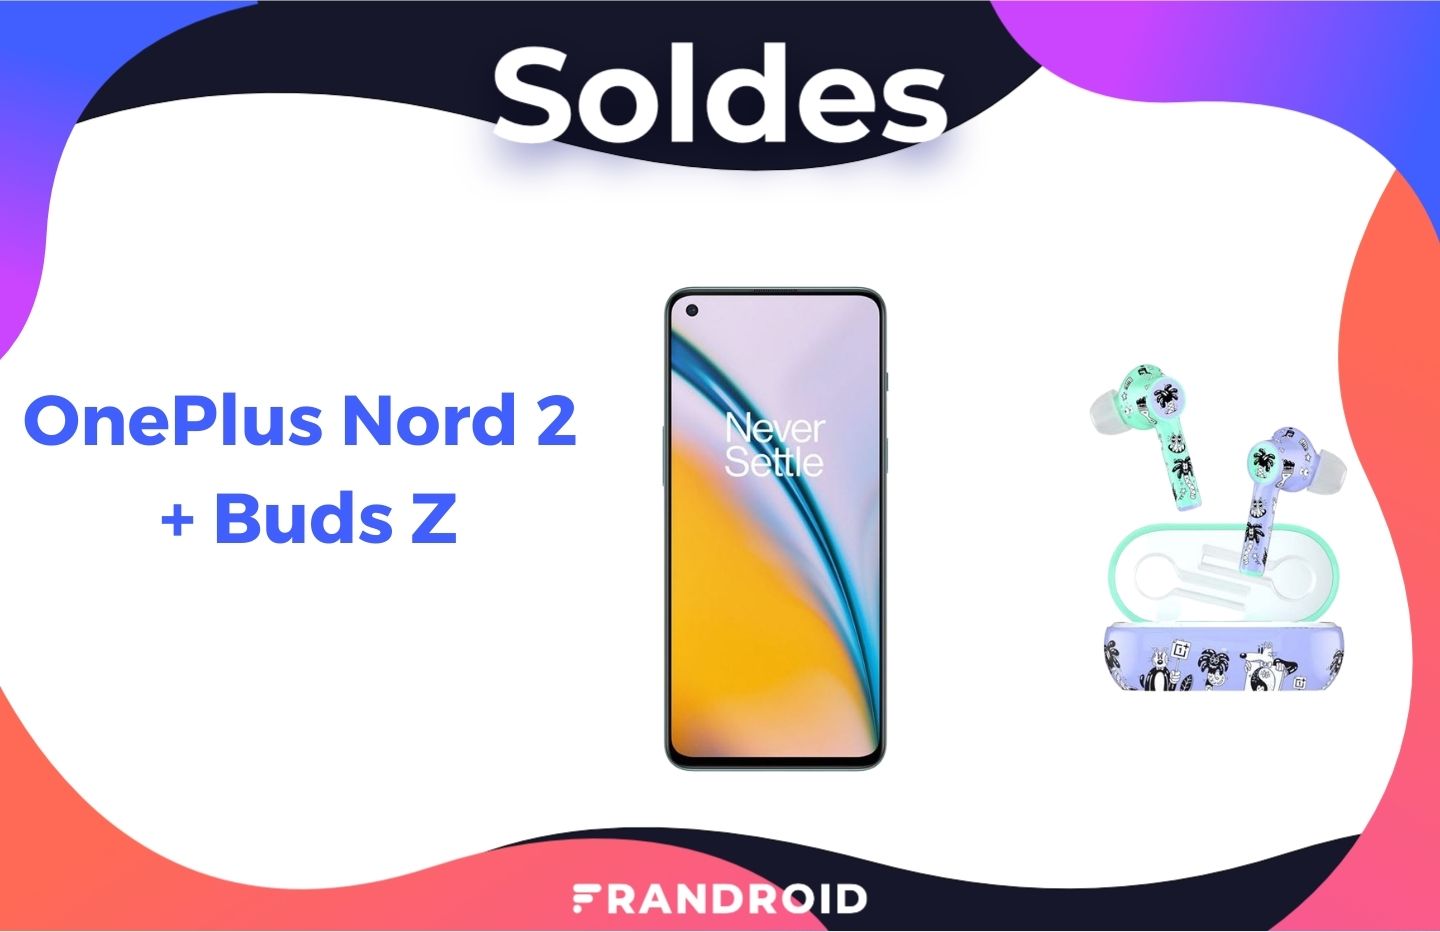 Durant les soldes, la Fnac brade le pack OnePlus Nord 2 + OnePlus Buds Z